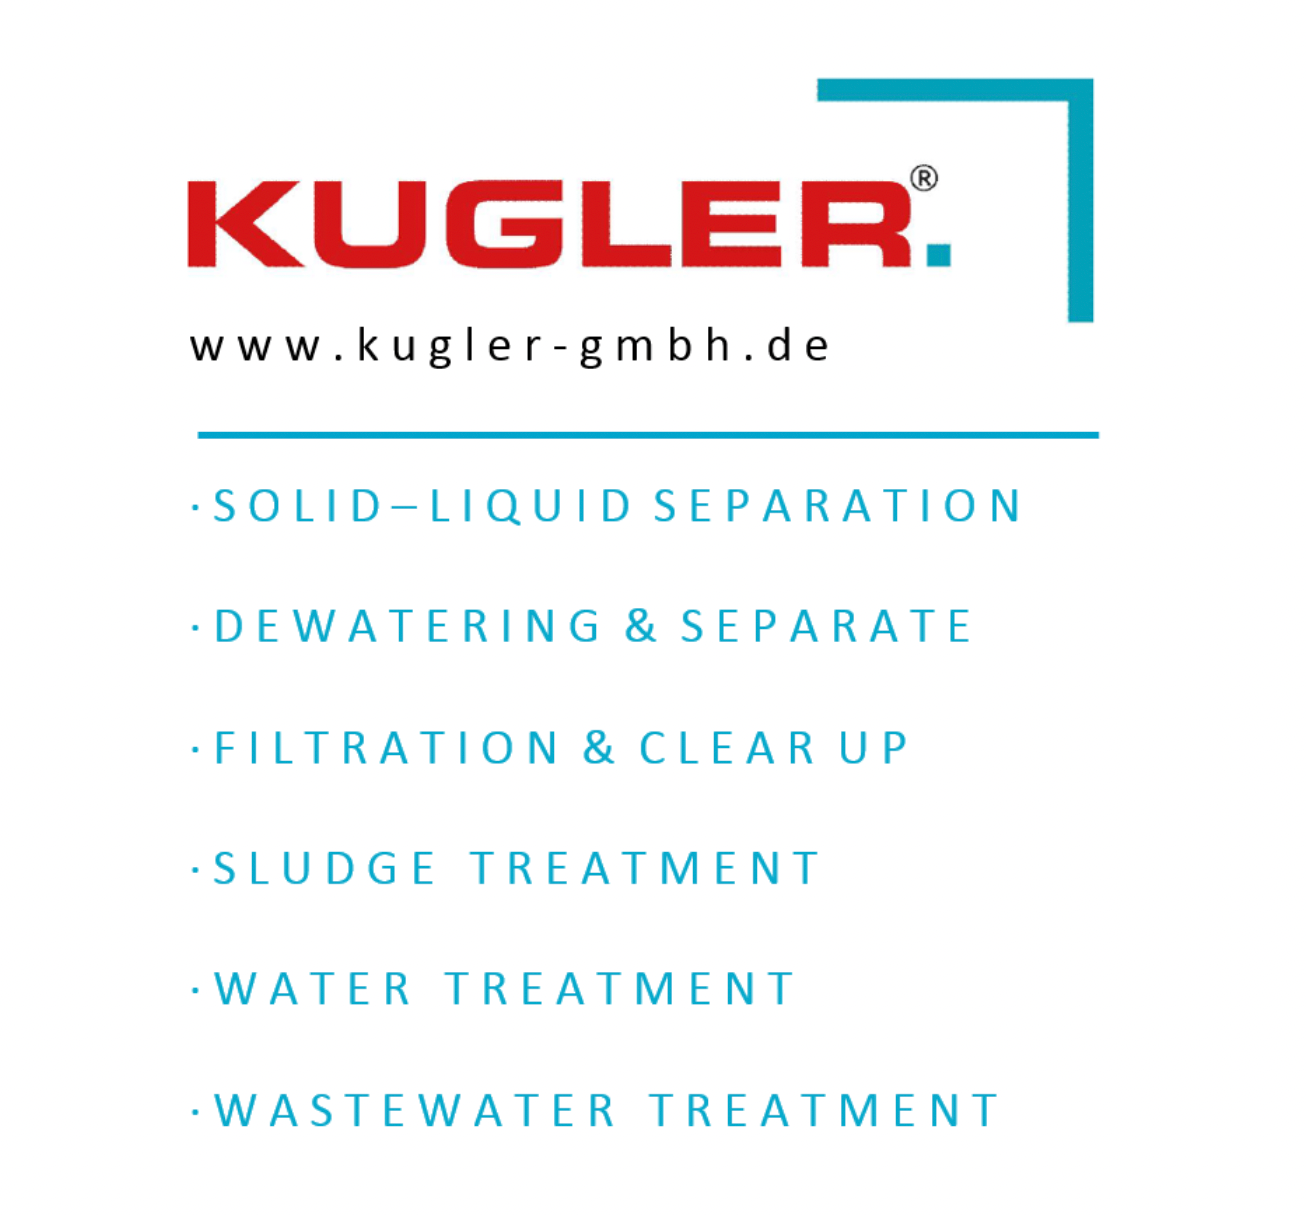 Concepts for solid-liquid separation | KUGLER GmbH